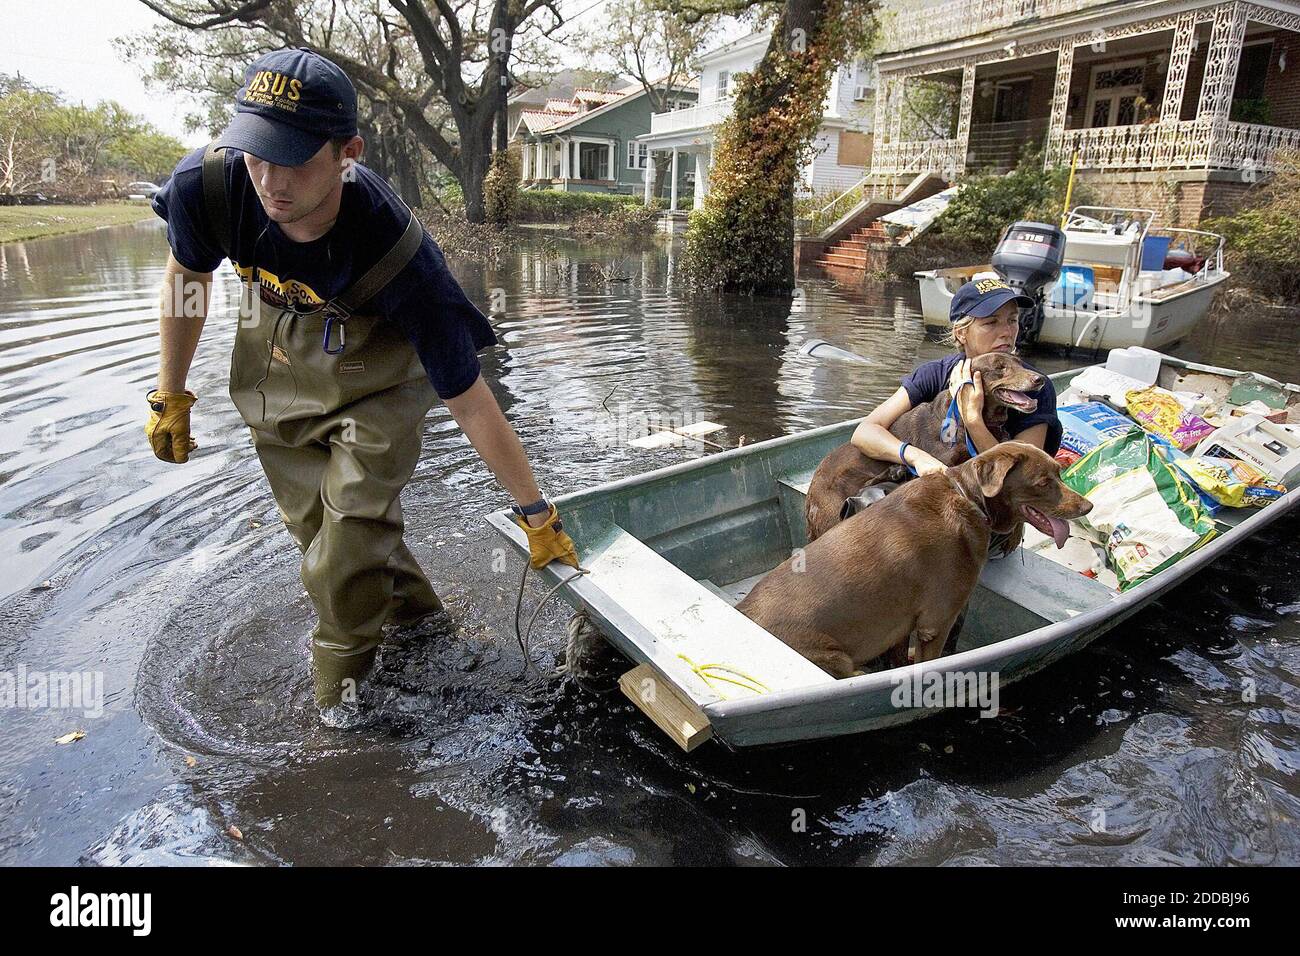 NO FILM, NO VIDEO, NO TV, NO DOCUMENTARY - Humane Society of the United  States animal rescue crew member Drew Moore (left) pulls a rescue boat to  shore as Jane Garrison cradles